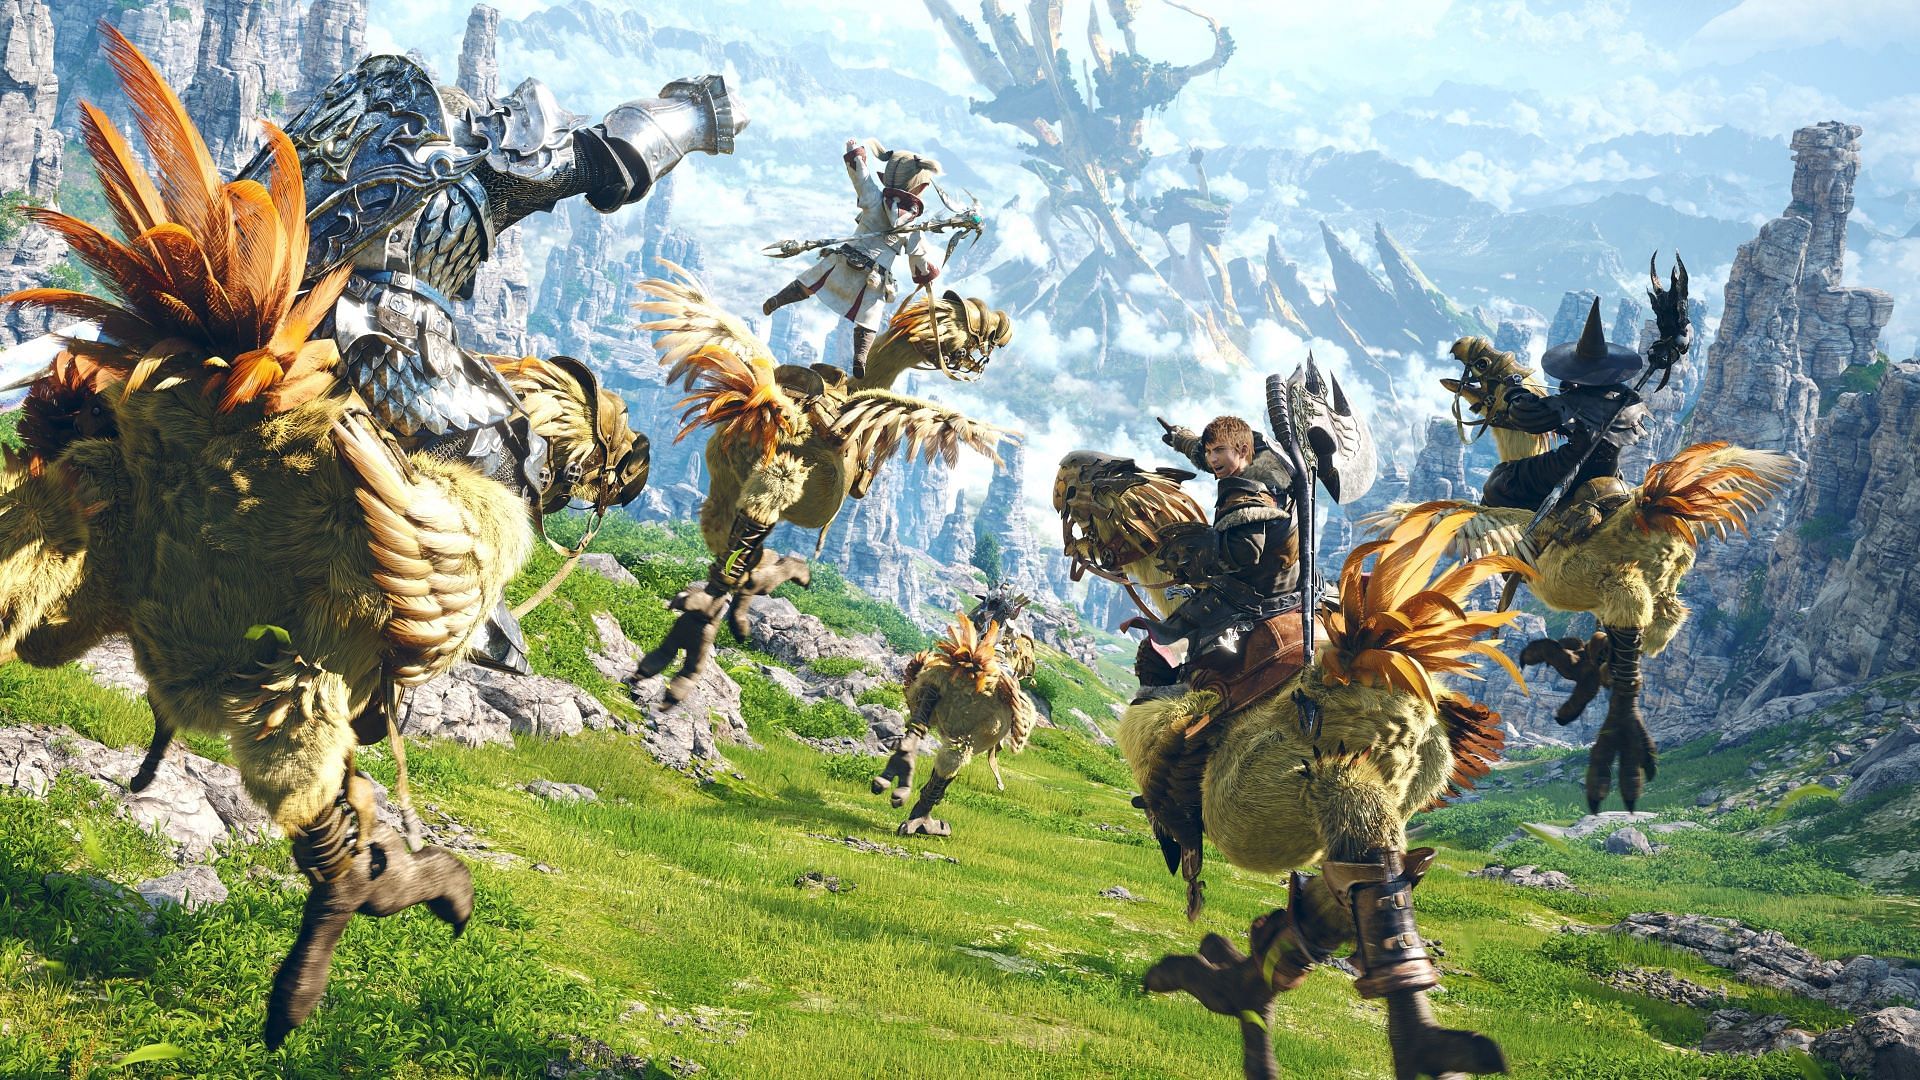 Check out the new loot in Final Fantasy XIV (Image via Square Enix)